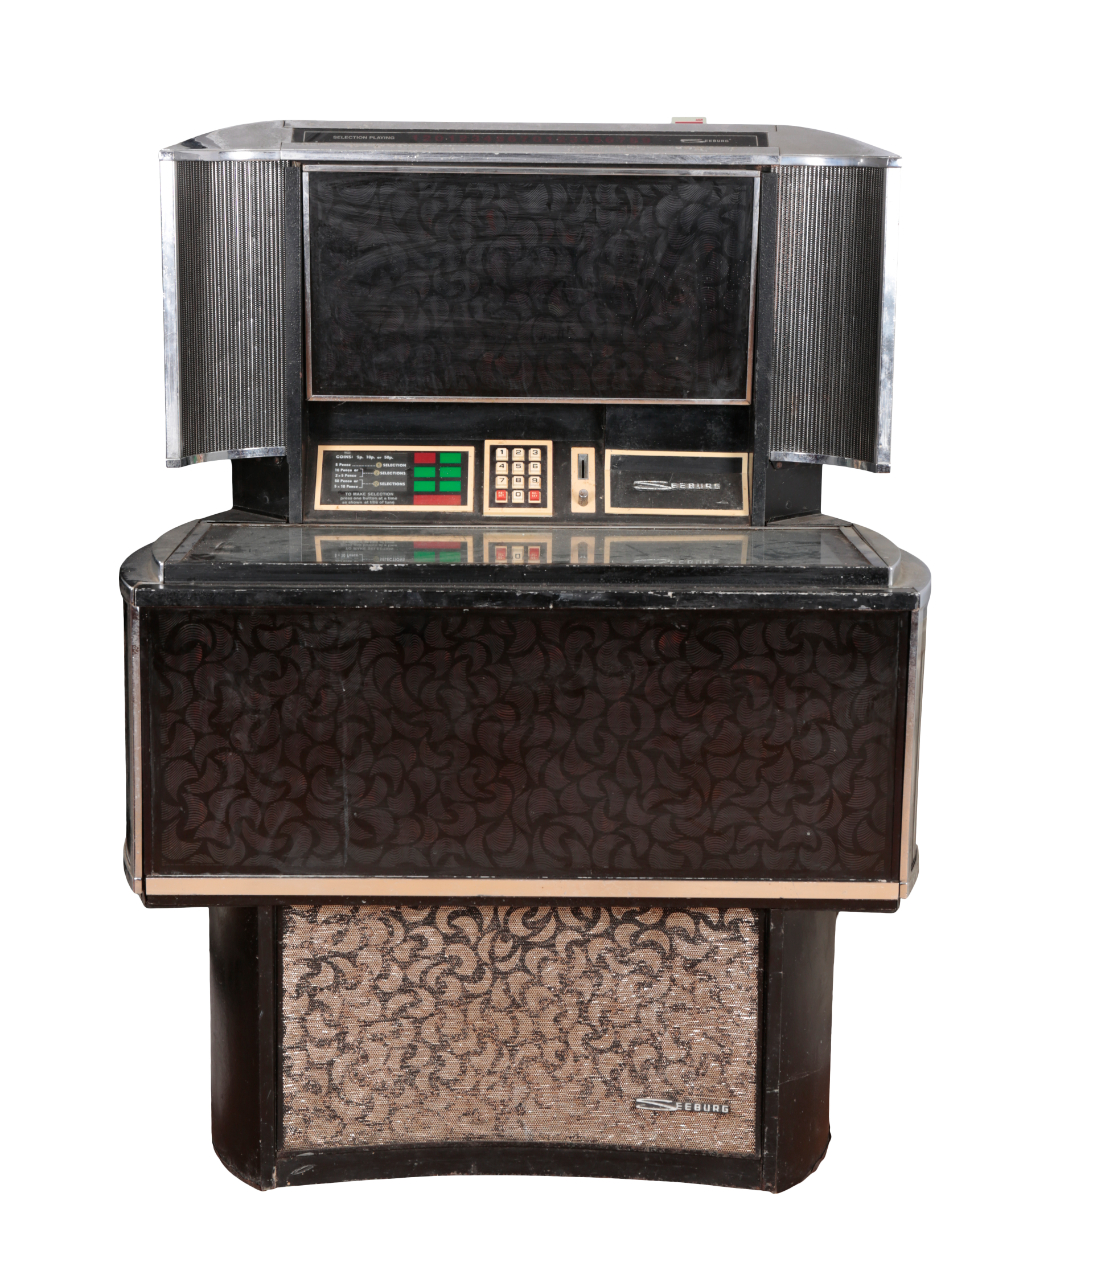 A 1972 SEEBURG SPS 160 JUKEBOX with